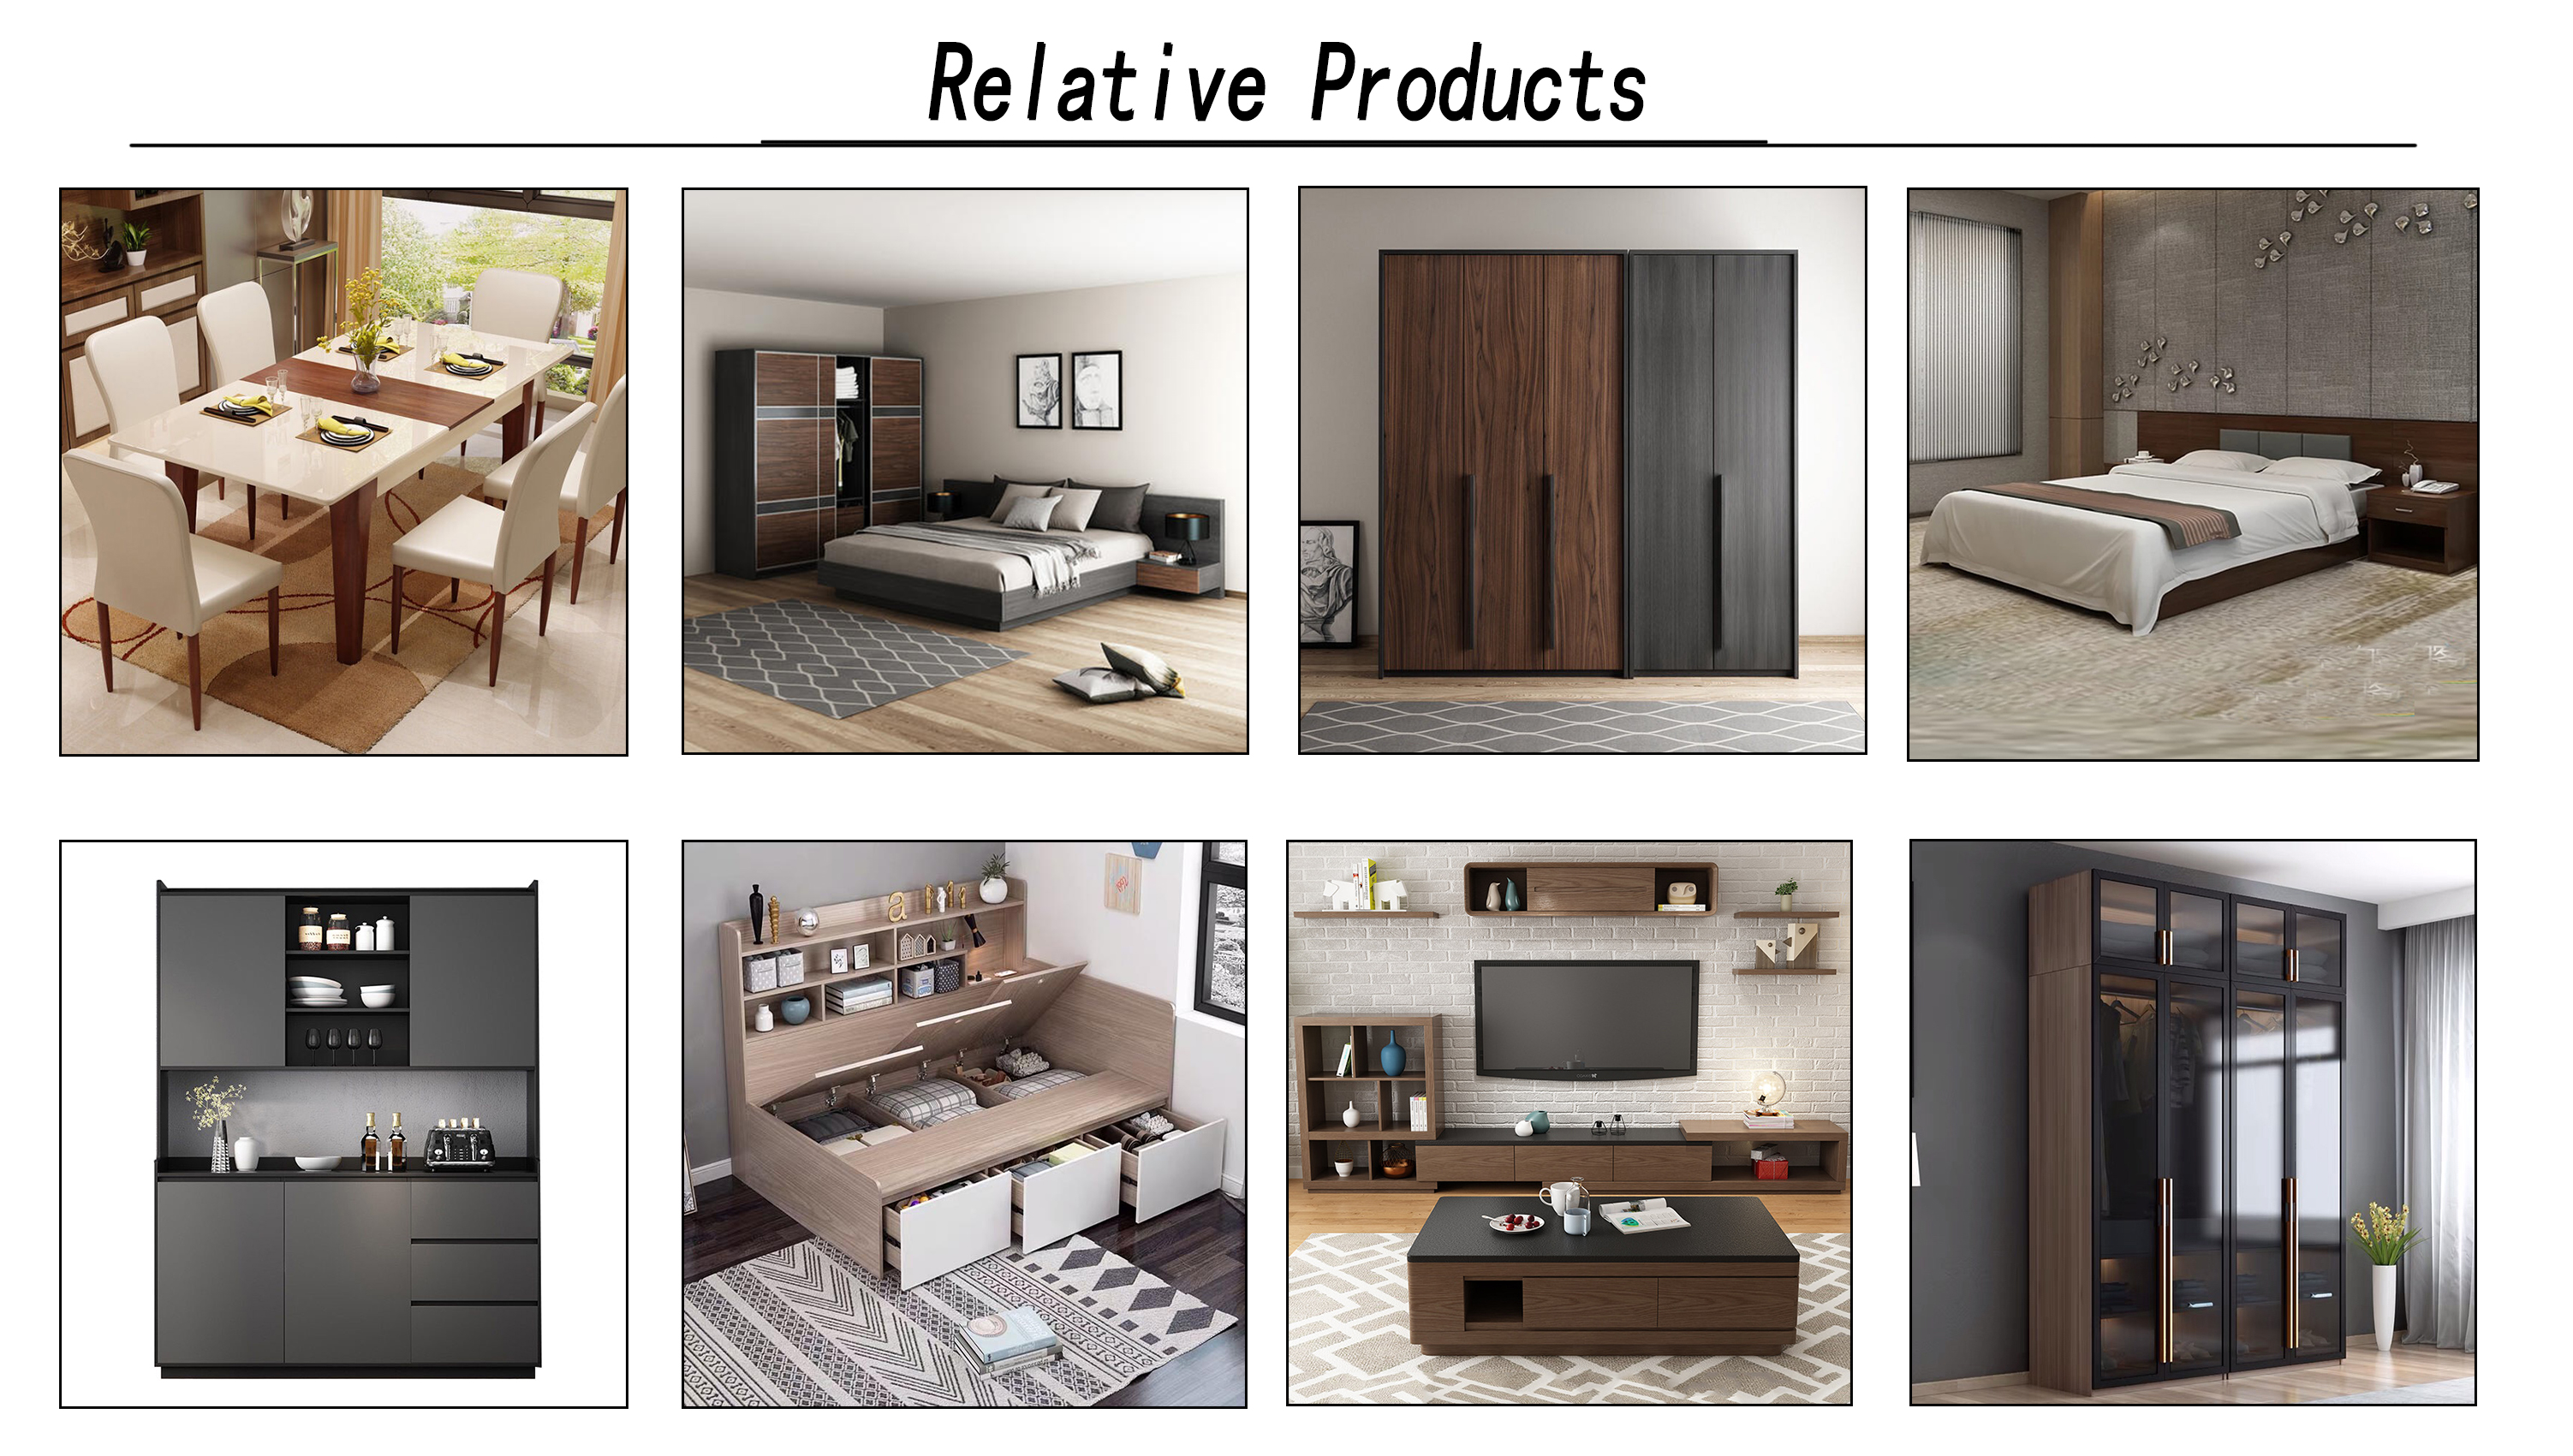 Relative Products(4)